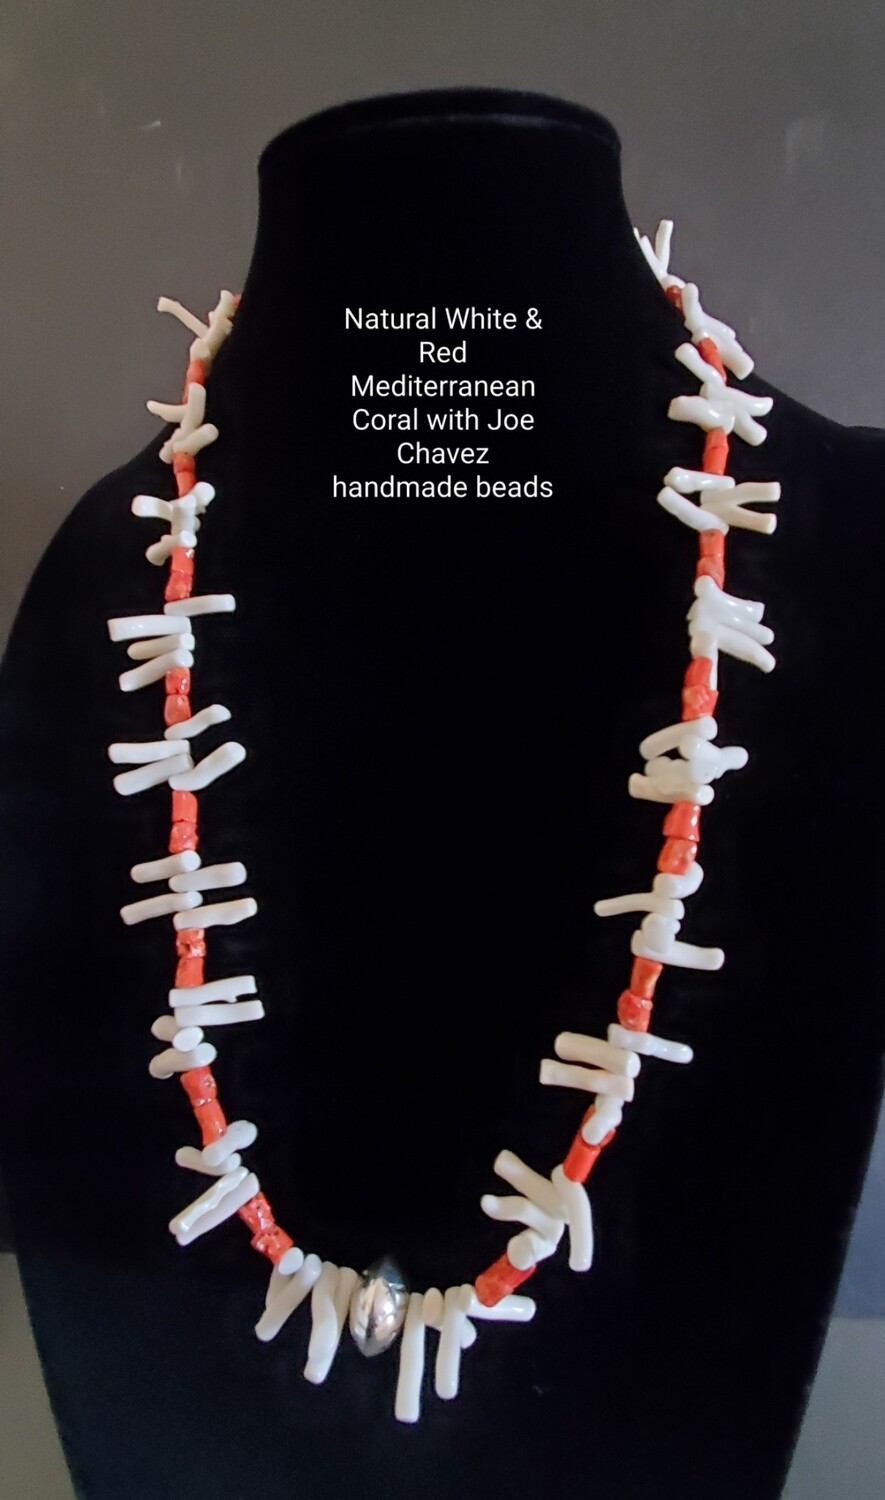 Natural Mediterranean White & Red Coral Necklace with handmade sterling silver beads